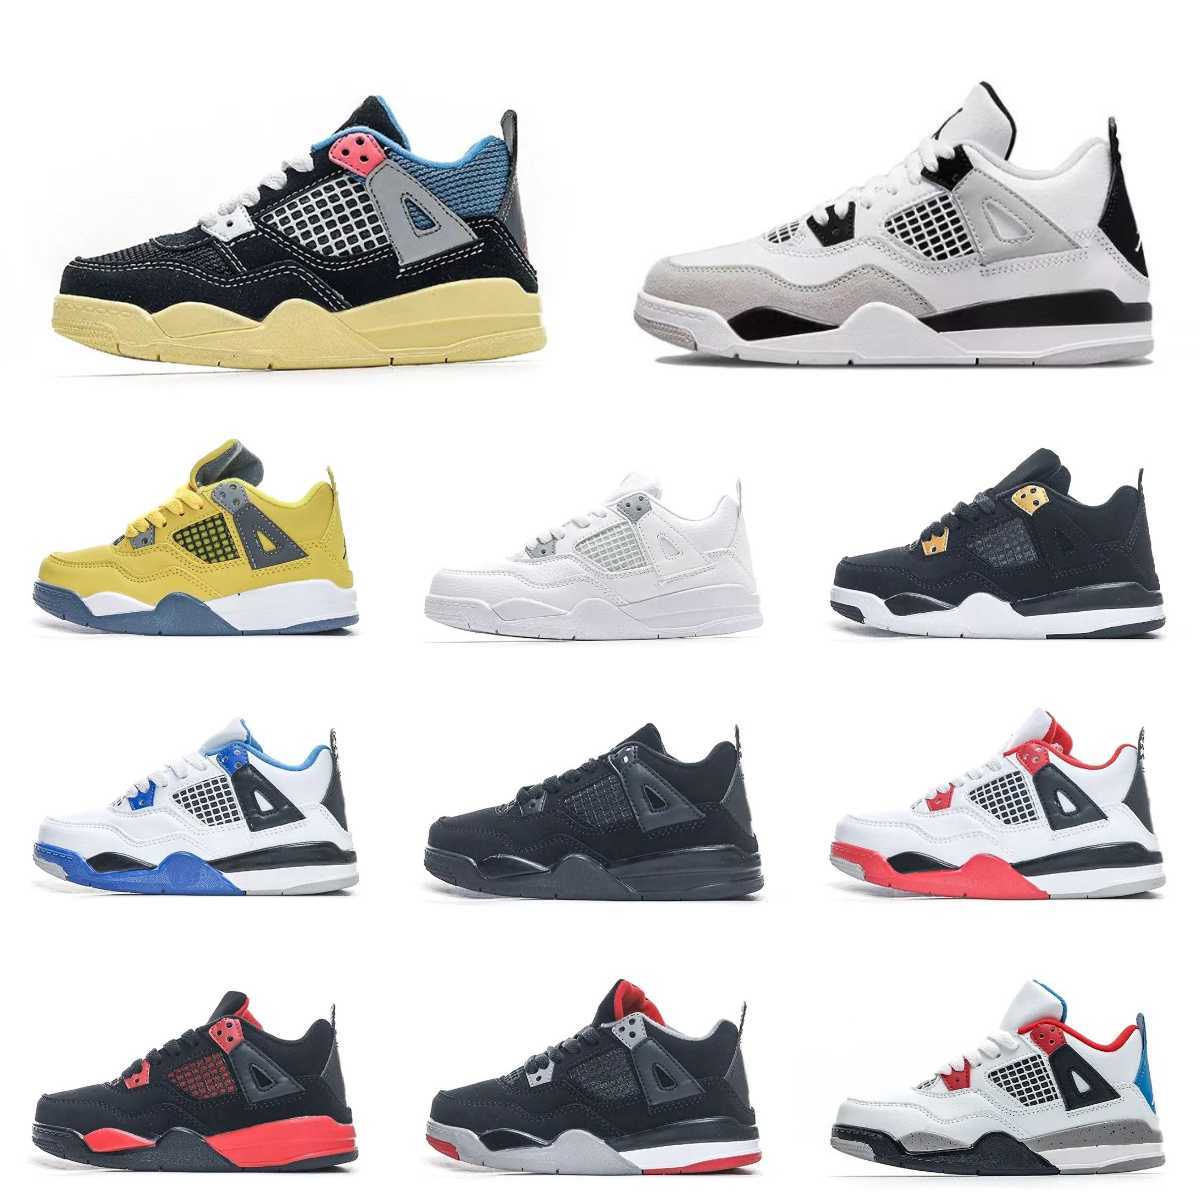 

Jumpman 4S Baby Military Black Basketball Shoes Trainers Kids Union Fire Red 4 Boy Girl Black Cat All White Pink University Blue Baby Red Thunder Infrared Sneakers, Please contact us